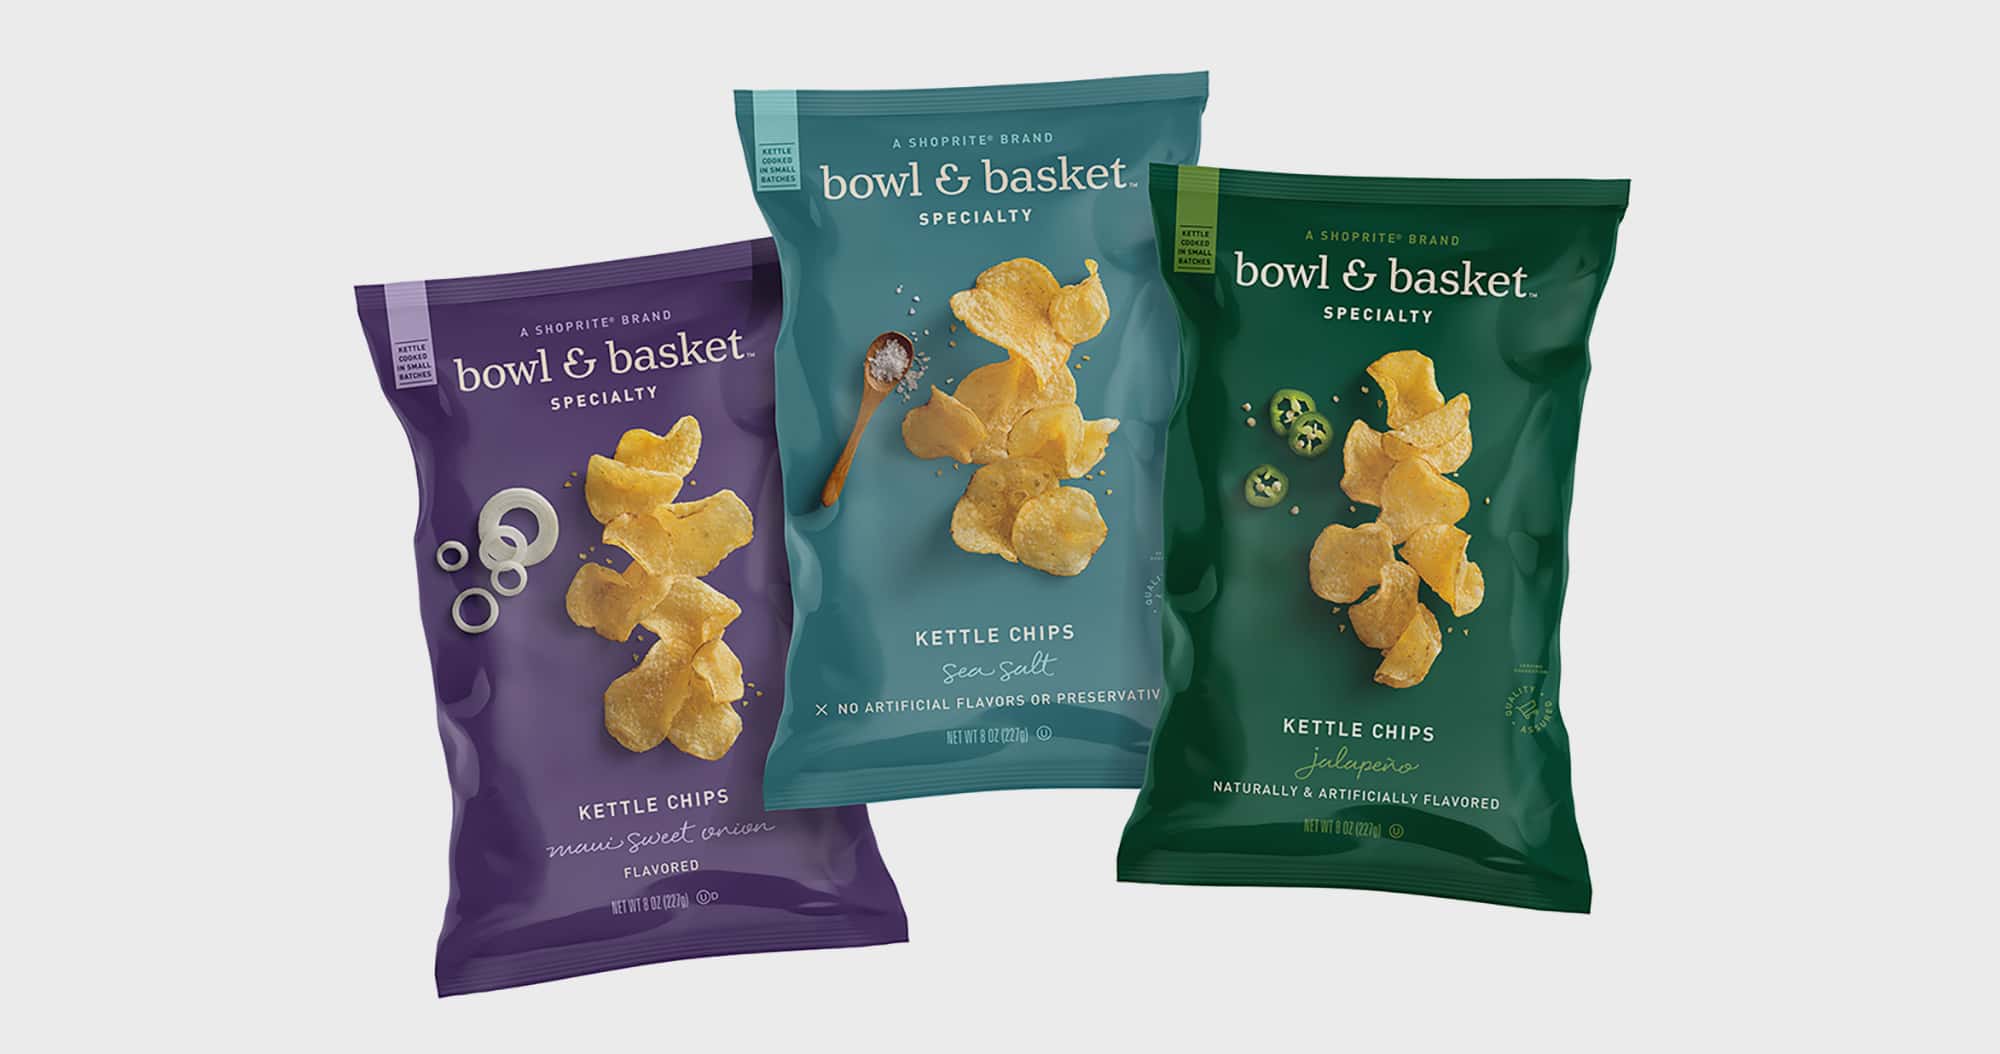 Bowl & Basket Specialty Kettle Chips BY Laura Kind, vice president of brand strategy, Wakefern; Glenn Pfeifer, design manager, Wakefern; design team, Pearlfisher; production team, SGS Co.